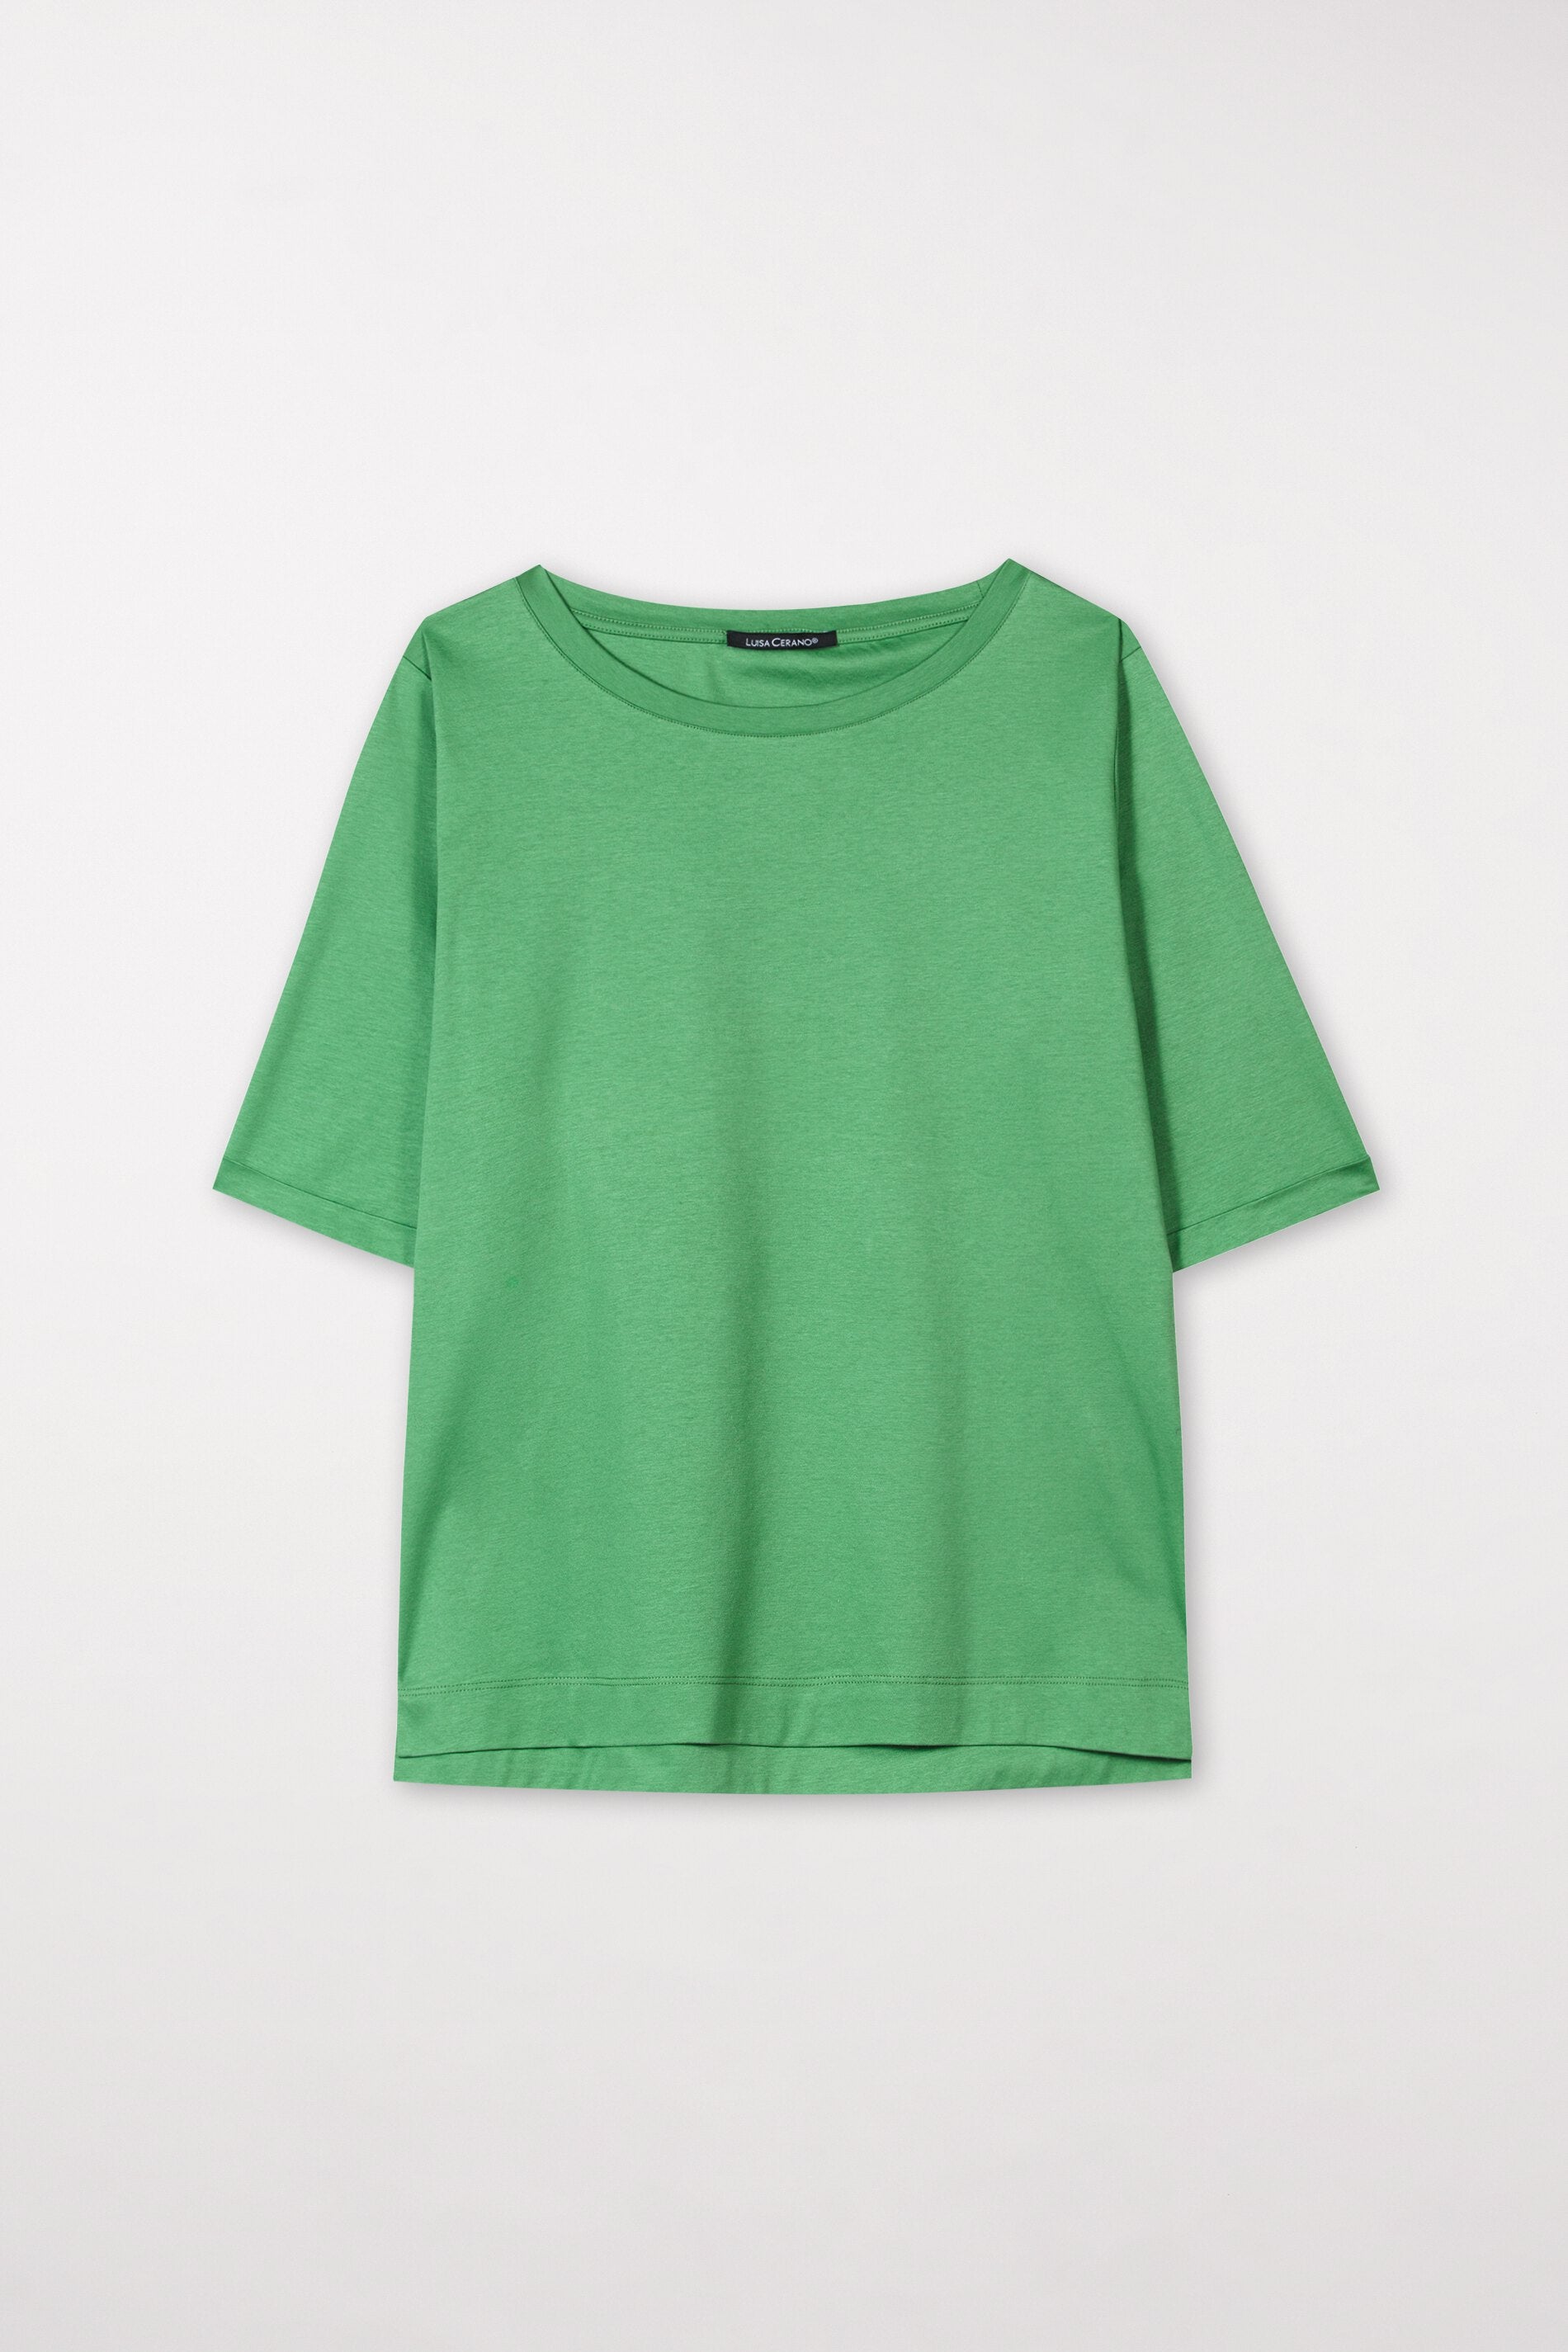 LUISA CERANO-OUTLET-SALE-Basic-Baumwoll-Shirt-34-smoky green-by-ARCHIVIST